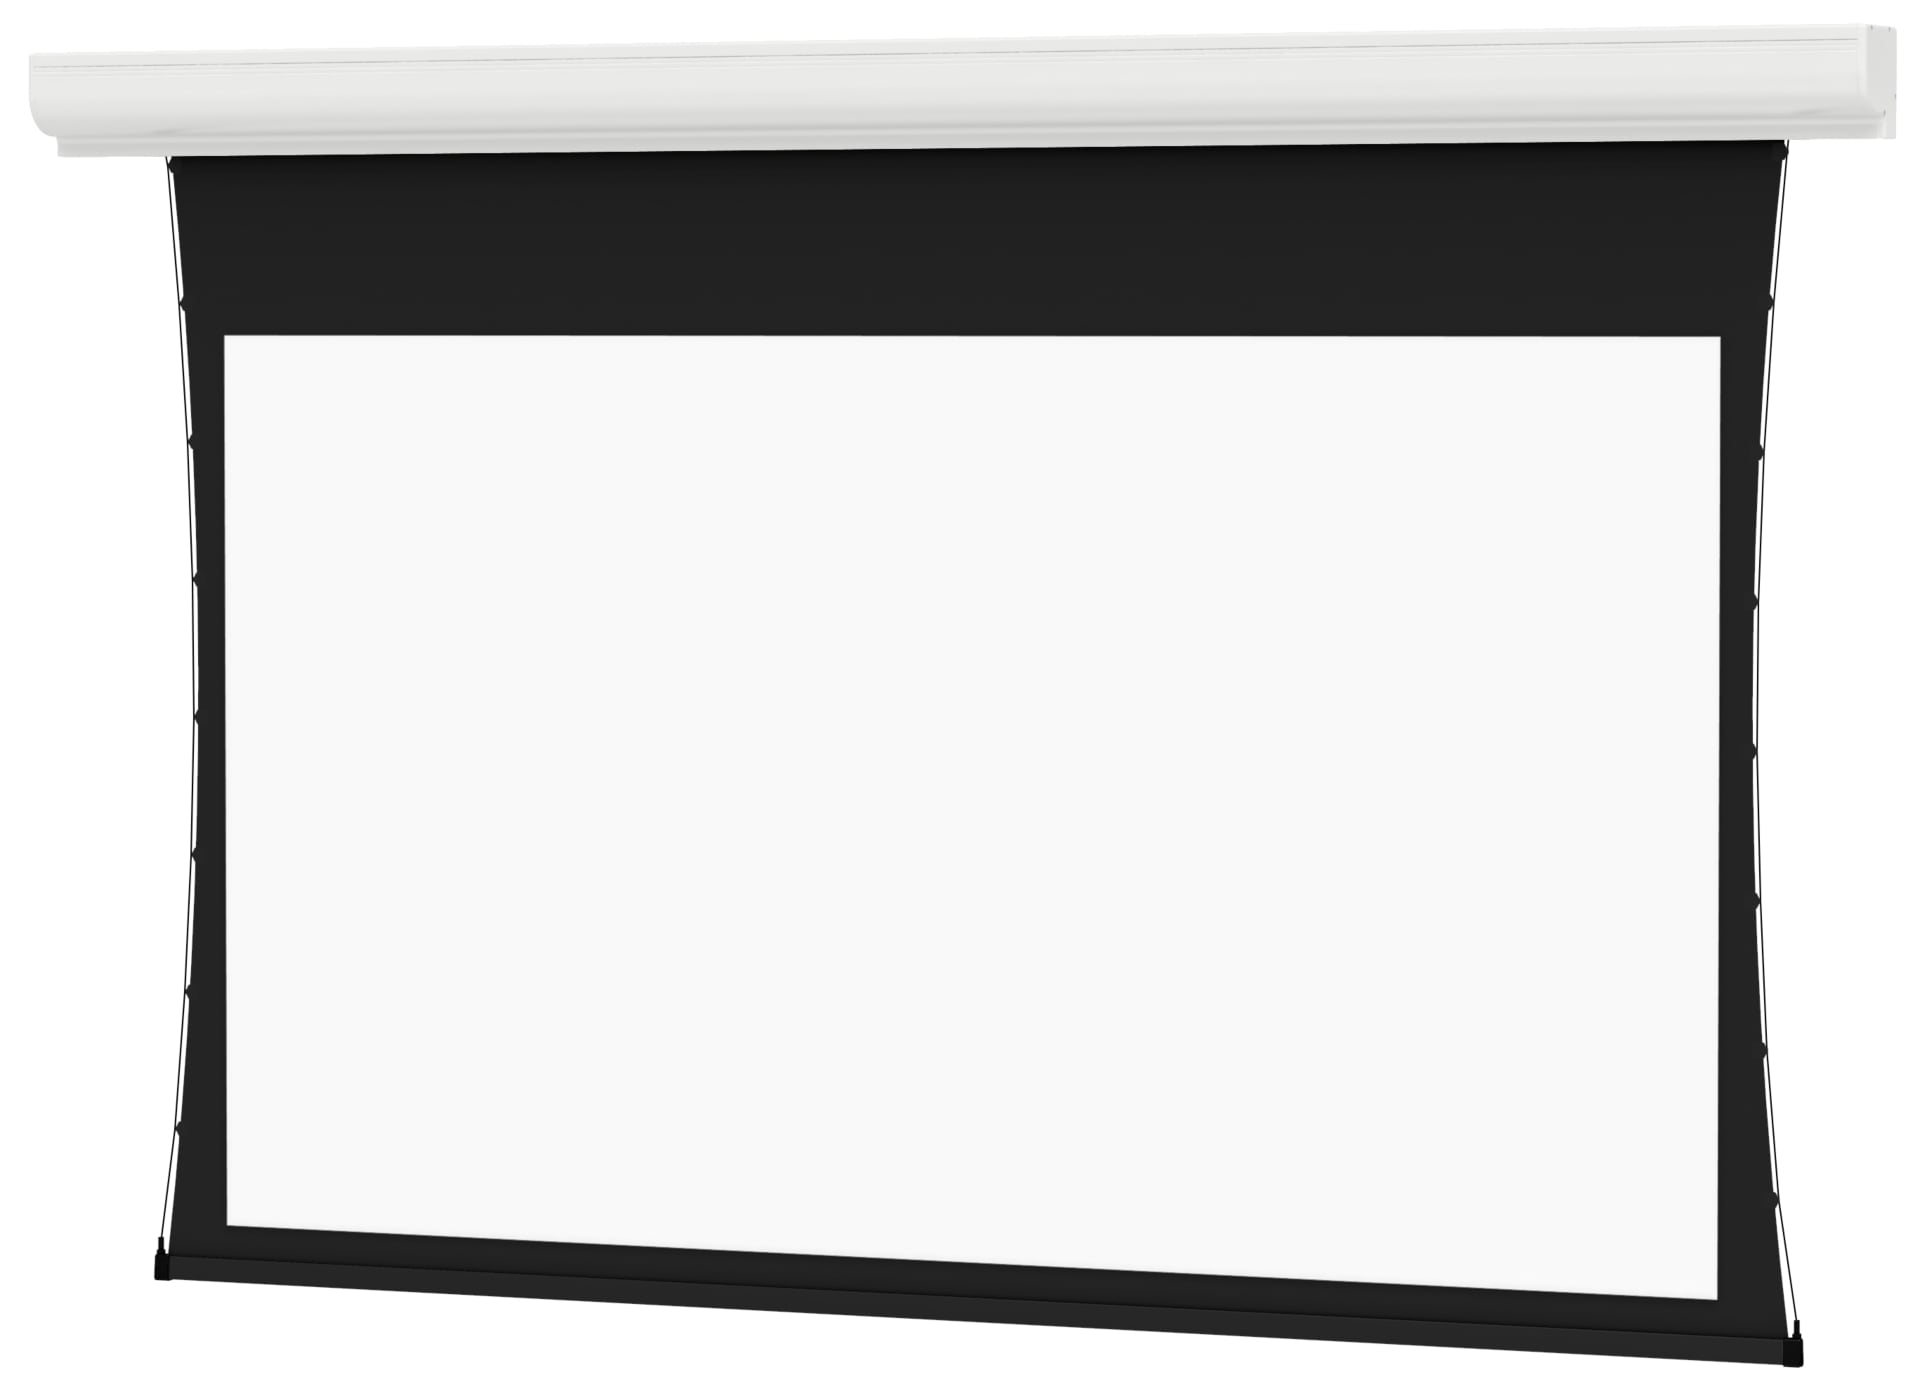 Da-Lite Tensioned Contour Electrol Series Projection Screen - Wall or Ceiling Mounted Electric Screen - 133in Screen